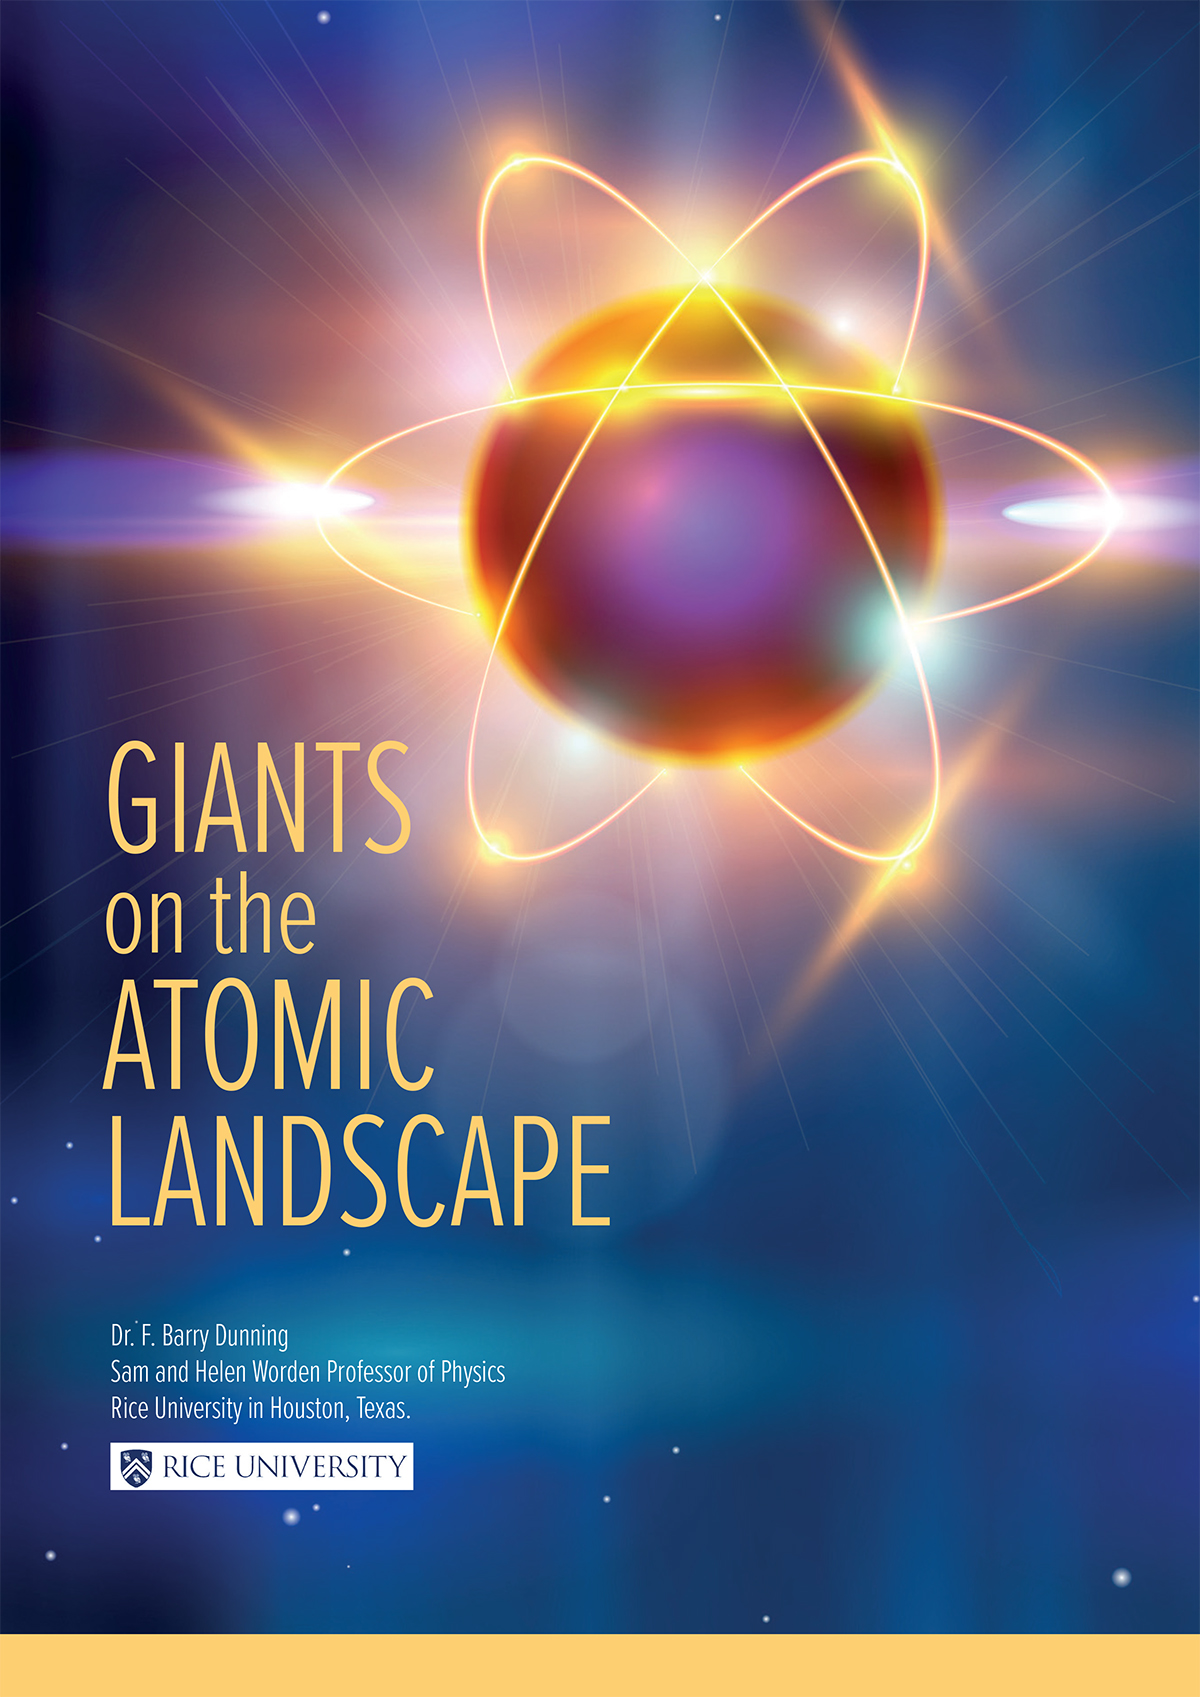 Giants on the atomic landscape